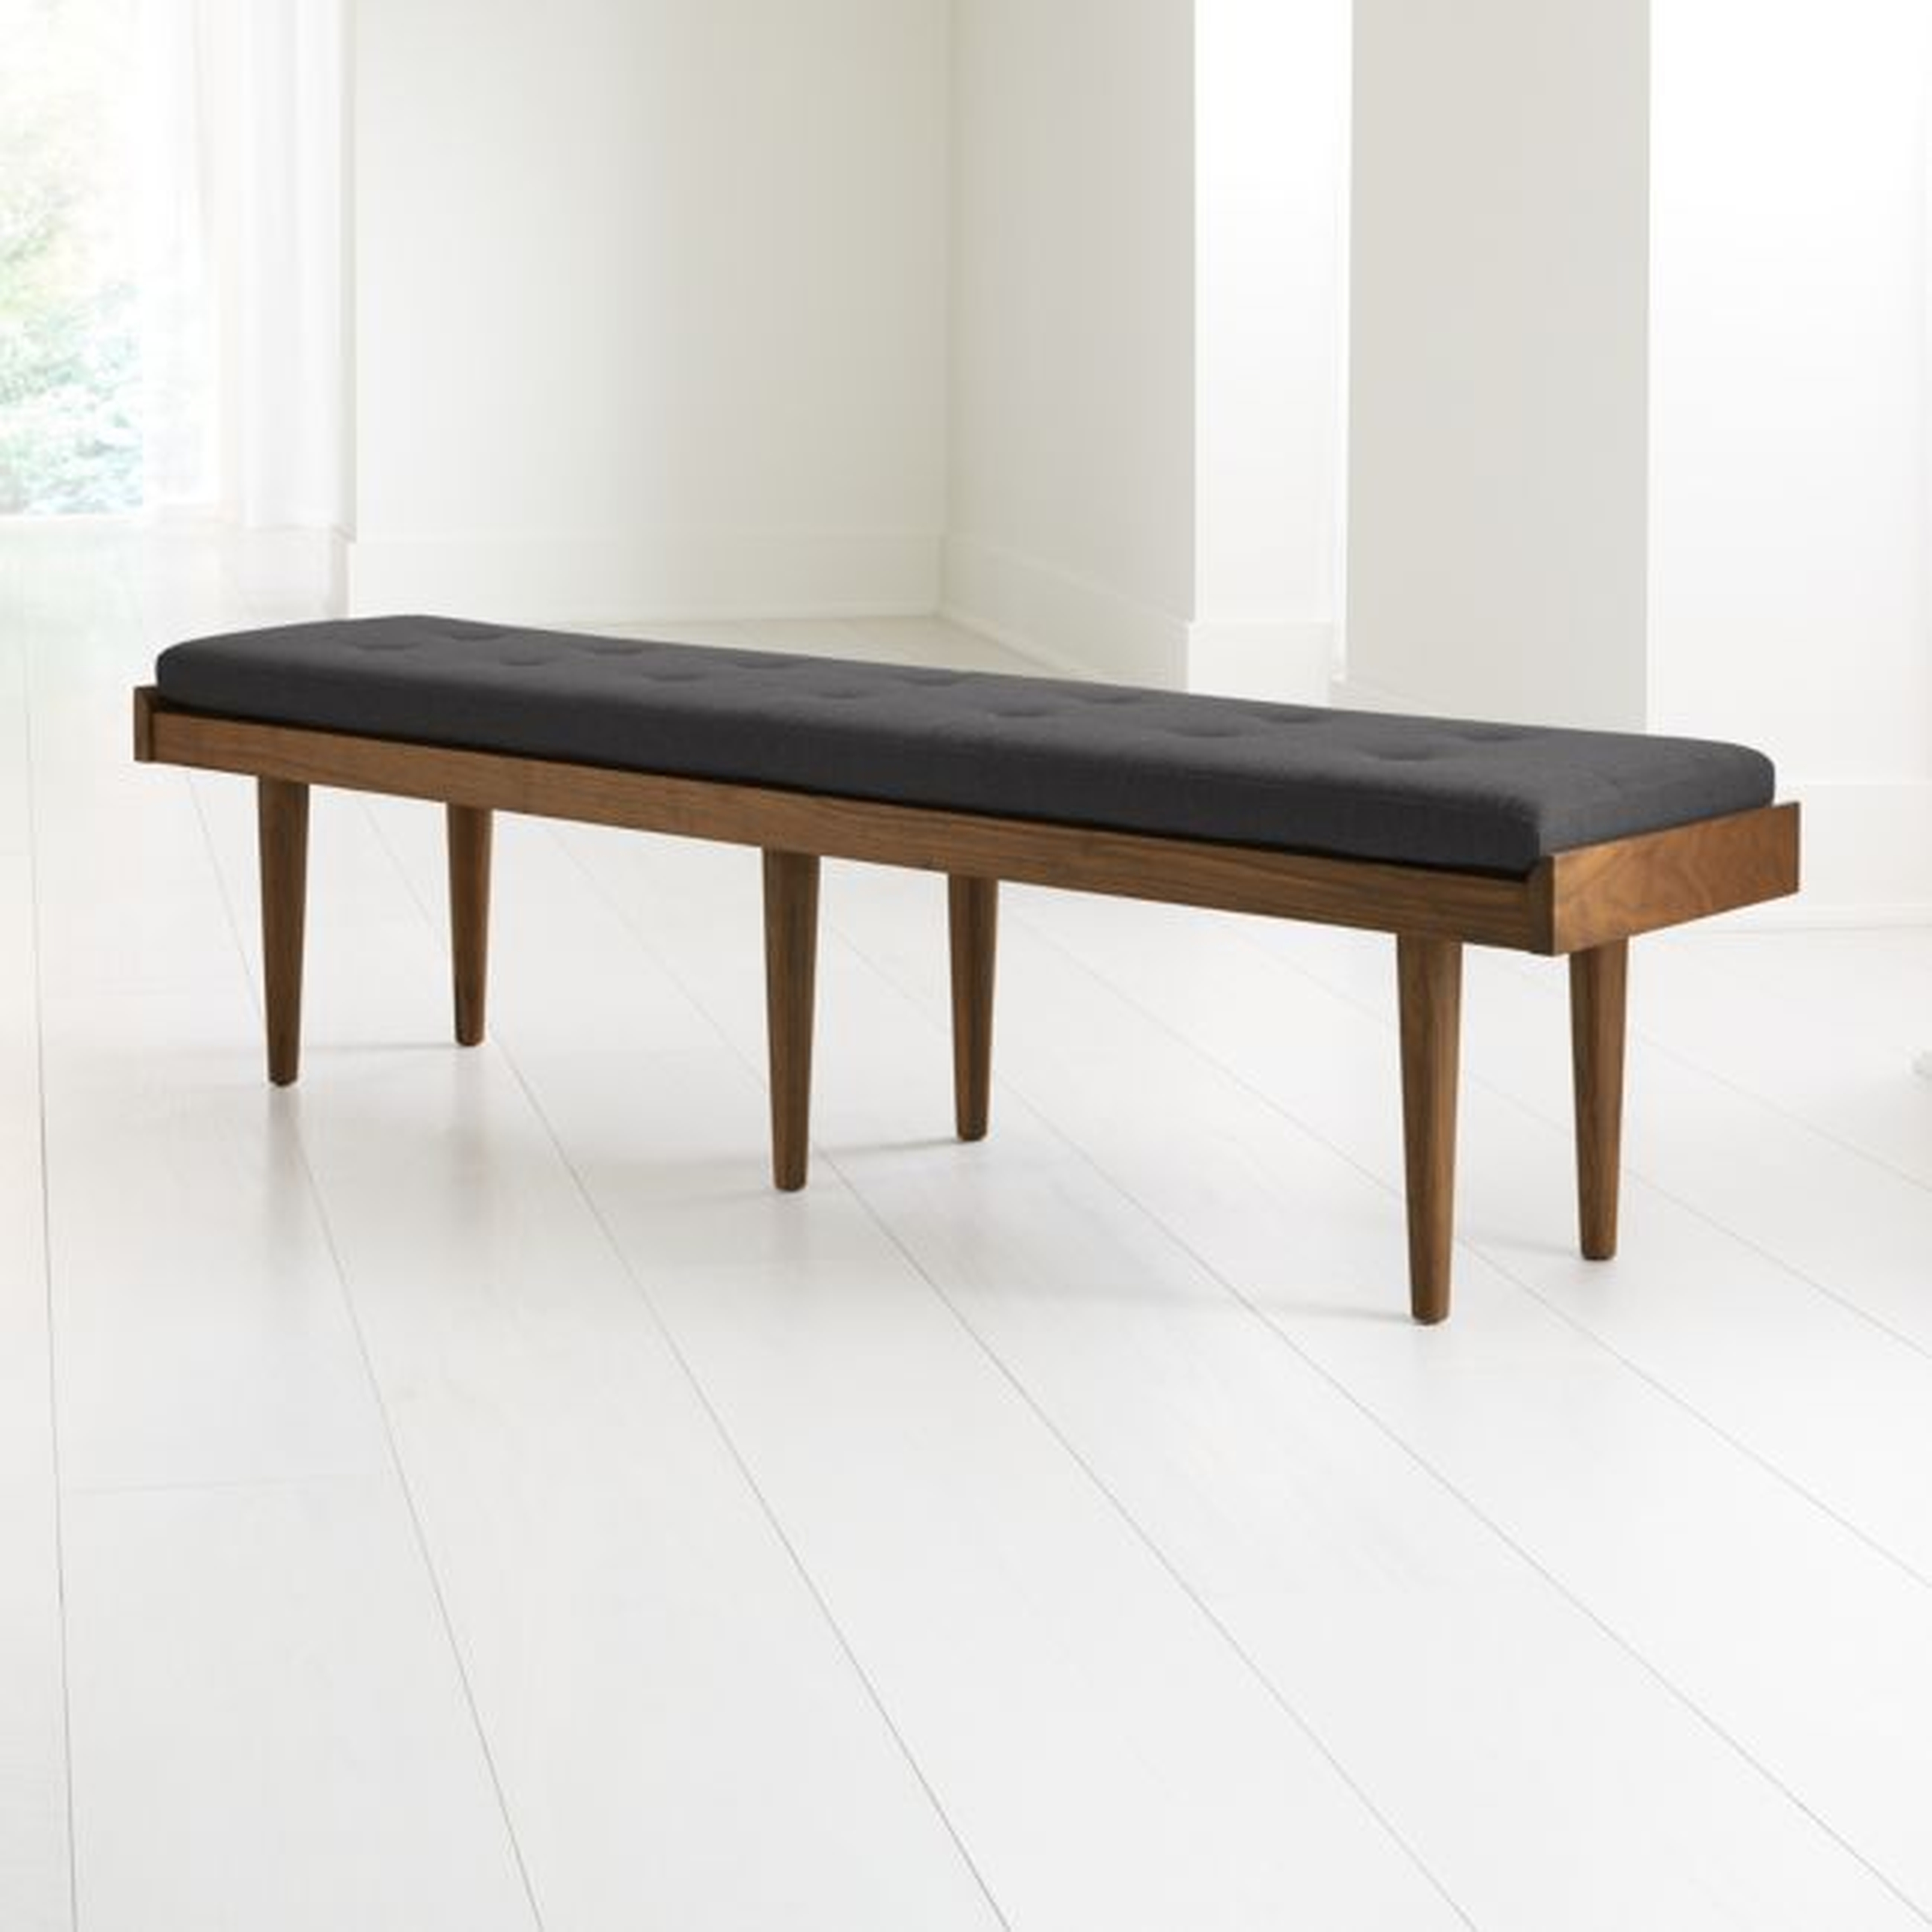 Tate Walnut King Bench with Charcoal Cushion - Crate and Barrel